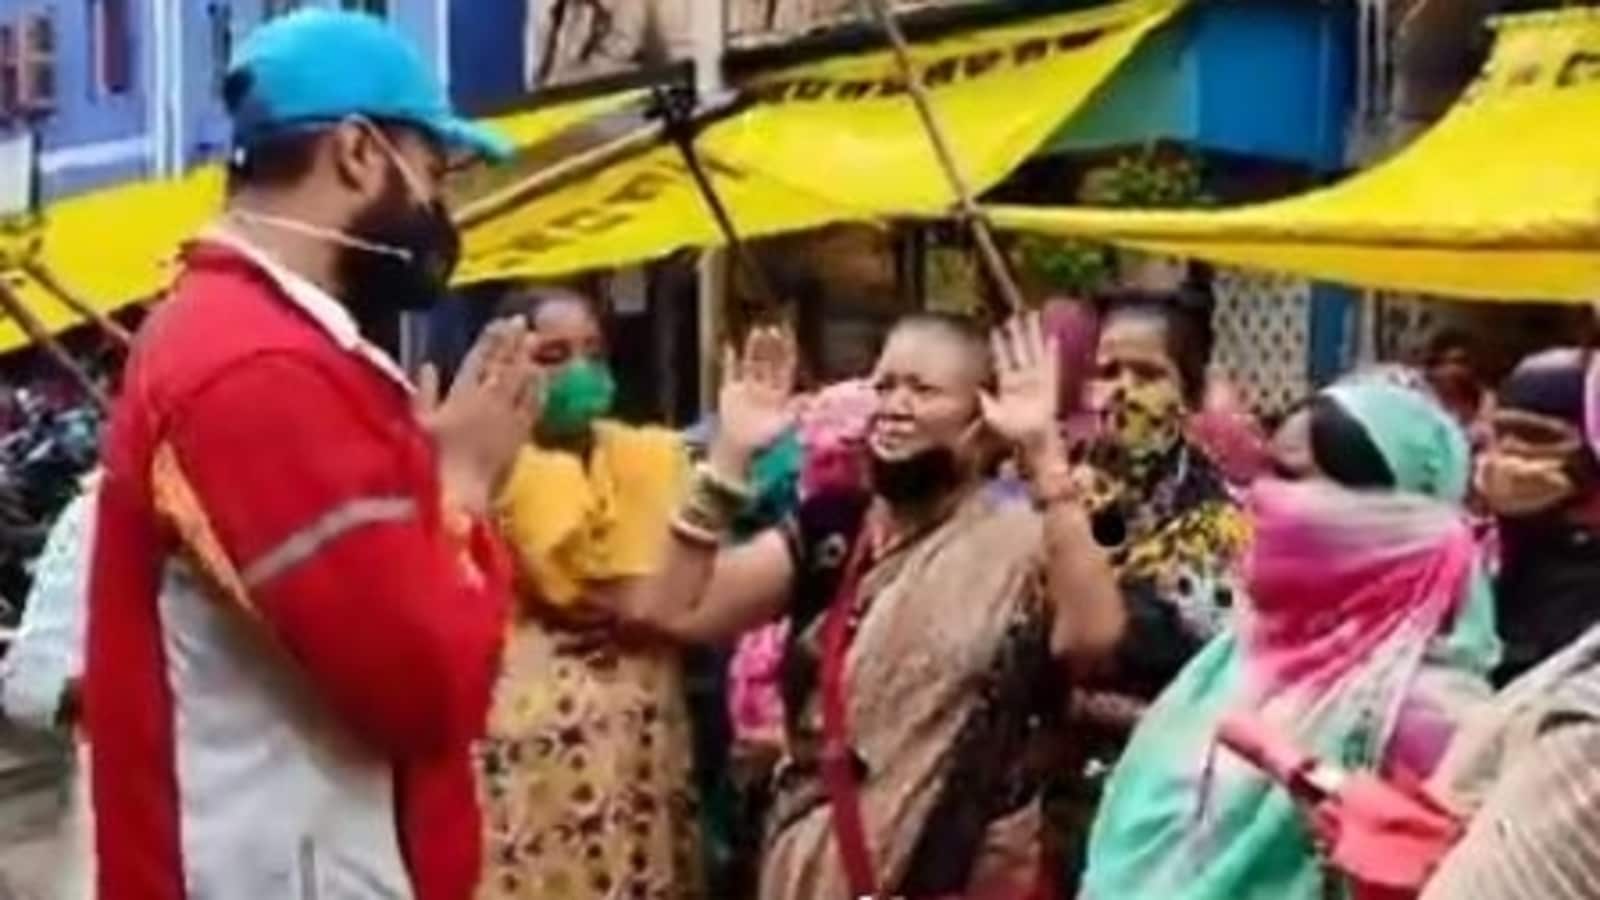 Shalin Bhanot Offers Aid To Kamathipura Sex Workers Was Shocked To Learn They Solicit